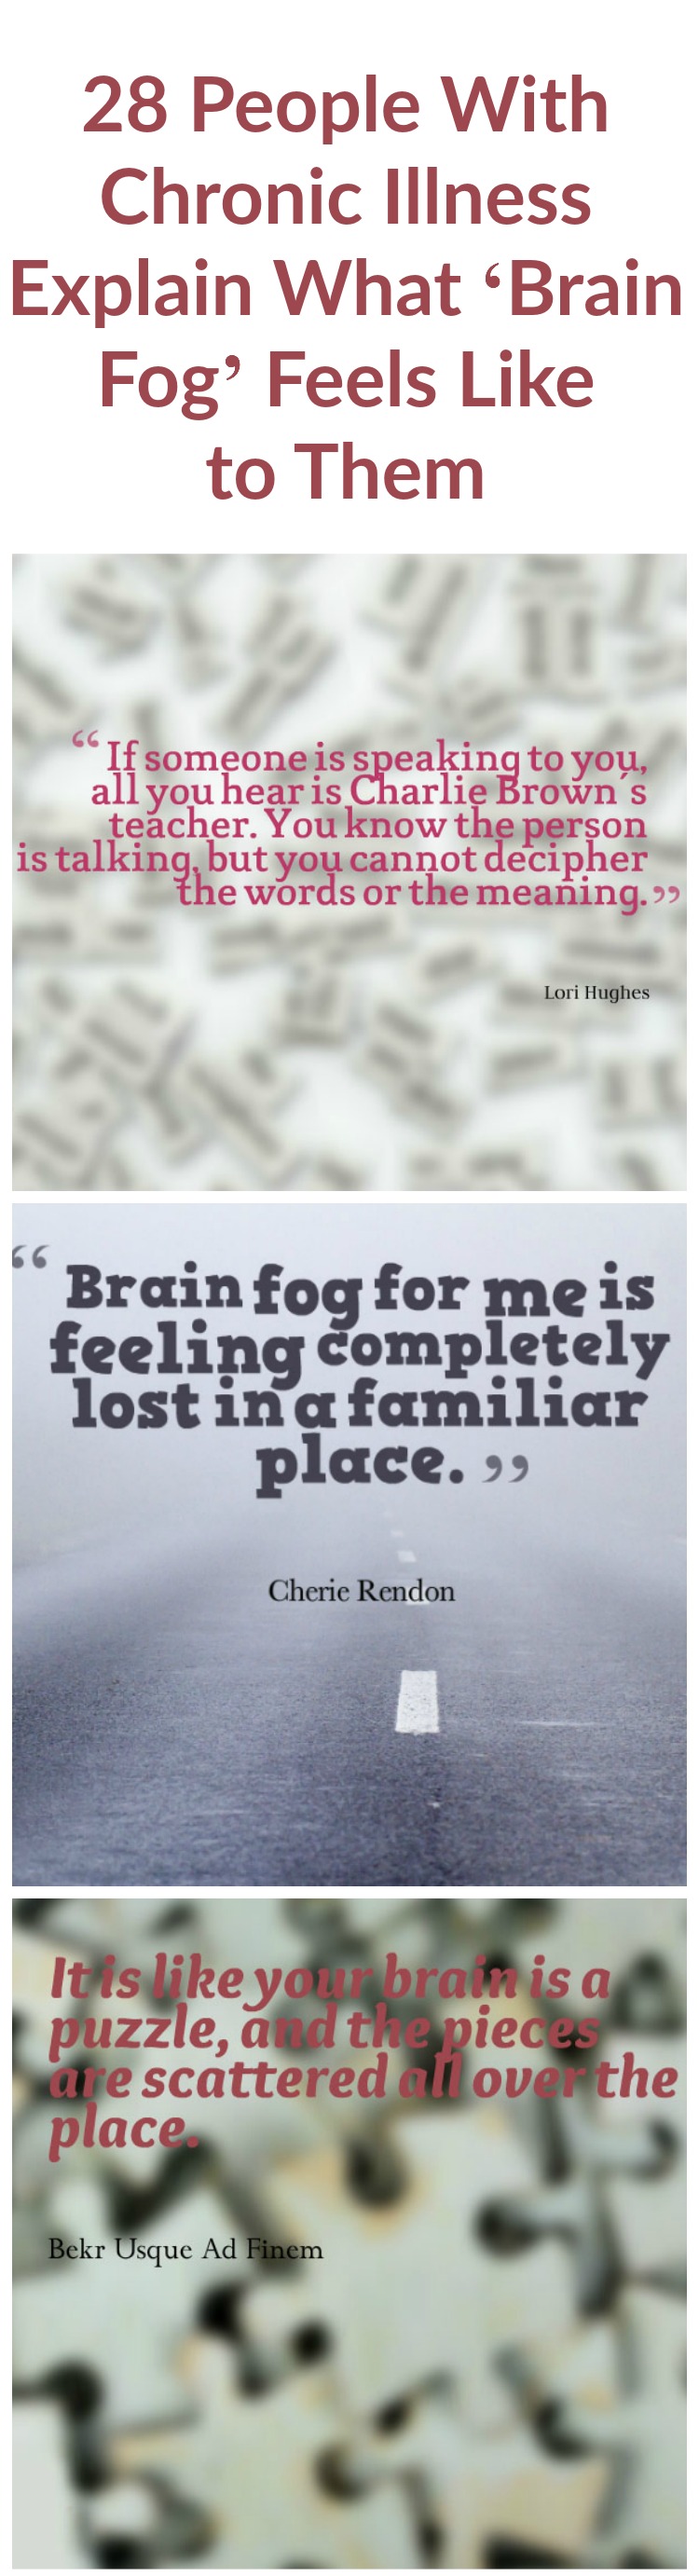 28 People With Chronic Illness Explain What ‘Brain Fog' Feels Like to Them